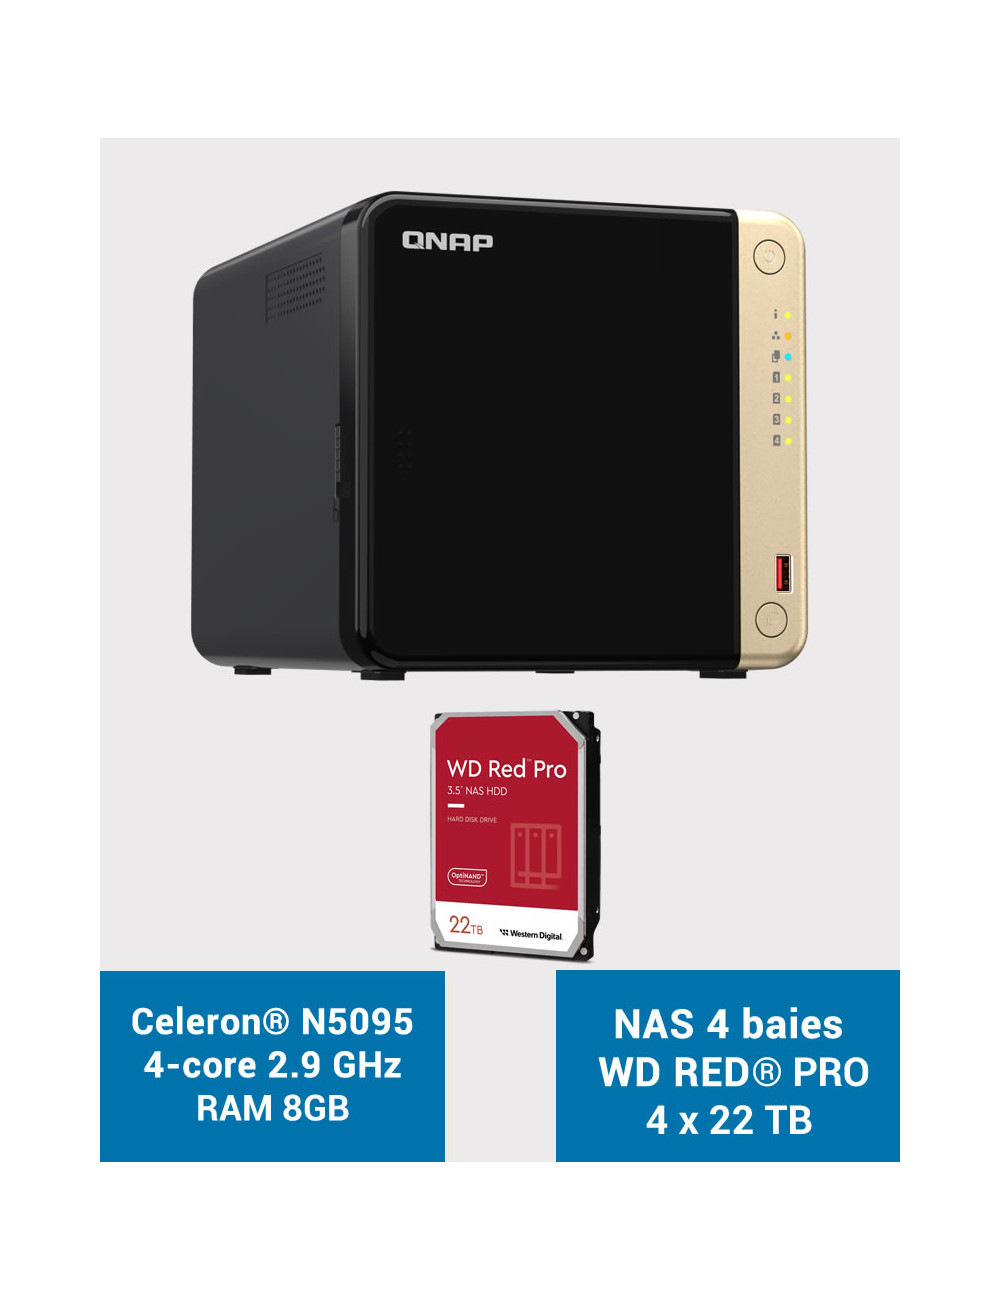 QNAP TS-464 8GB Serveur NAS 4 baies WD RED PRO 88To (4x22To)